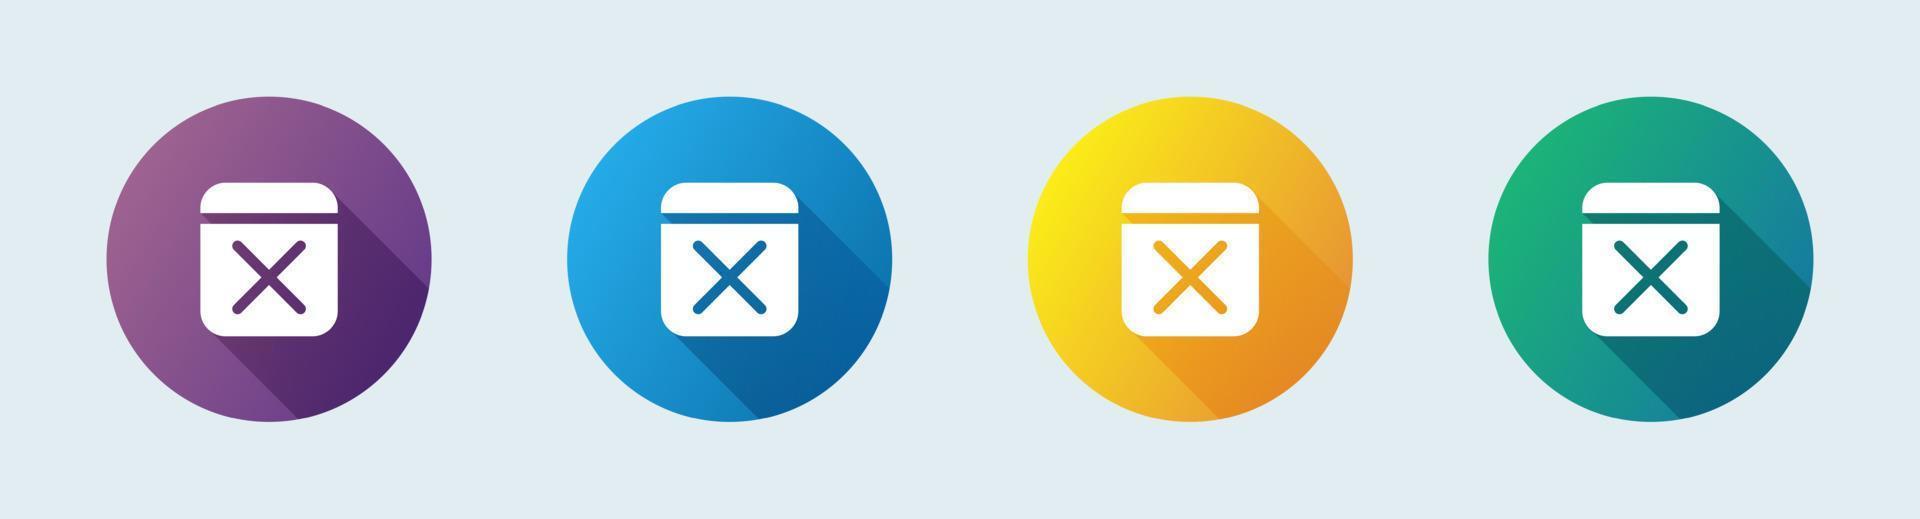 Remove solid icon in flat design style. Delete signs vector illustration.